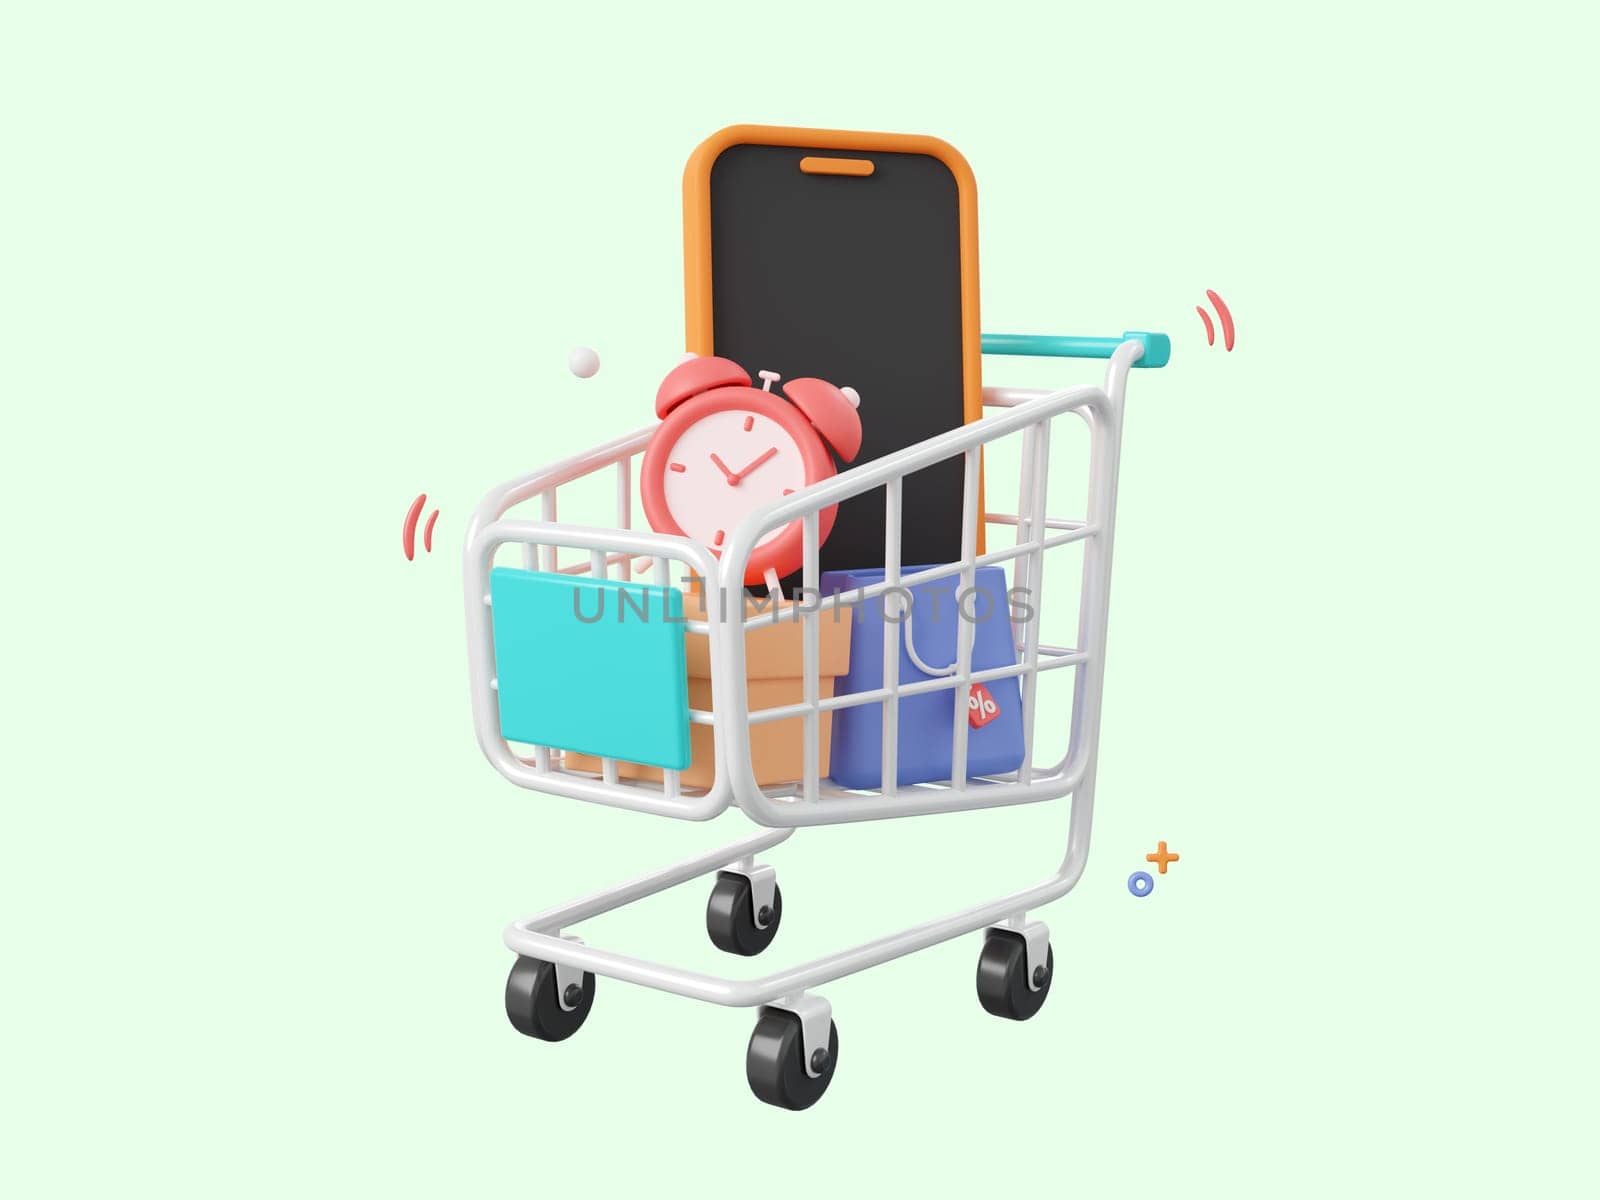 3d cartoon design illustration of Smartphone in shopping cart with parcel box, shopping bag and alarm clock, Shopping online on mobile concept.